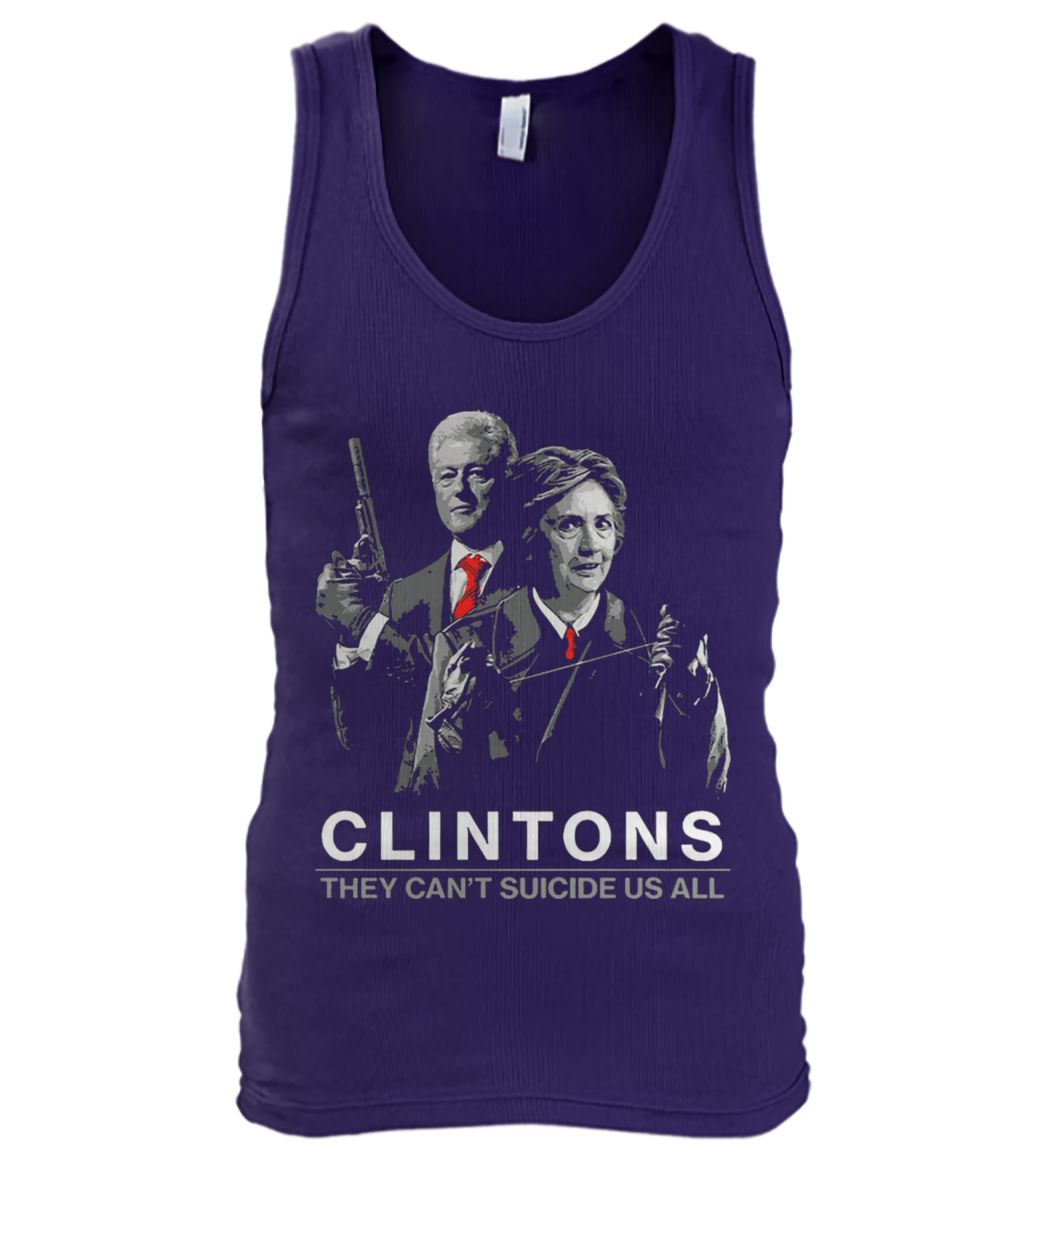 Clintons they can't suicide us all men's tank top